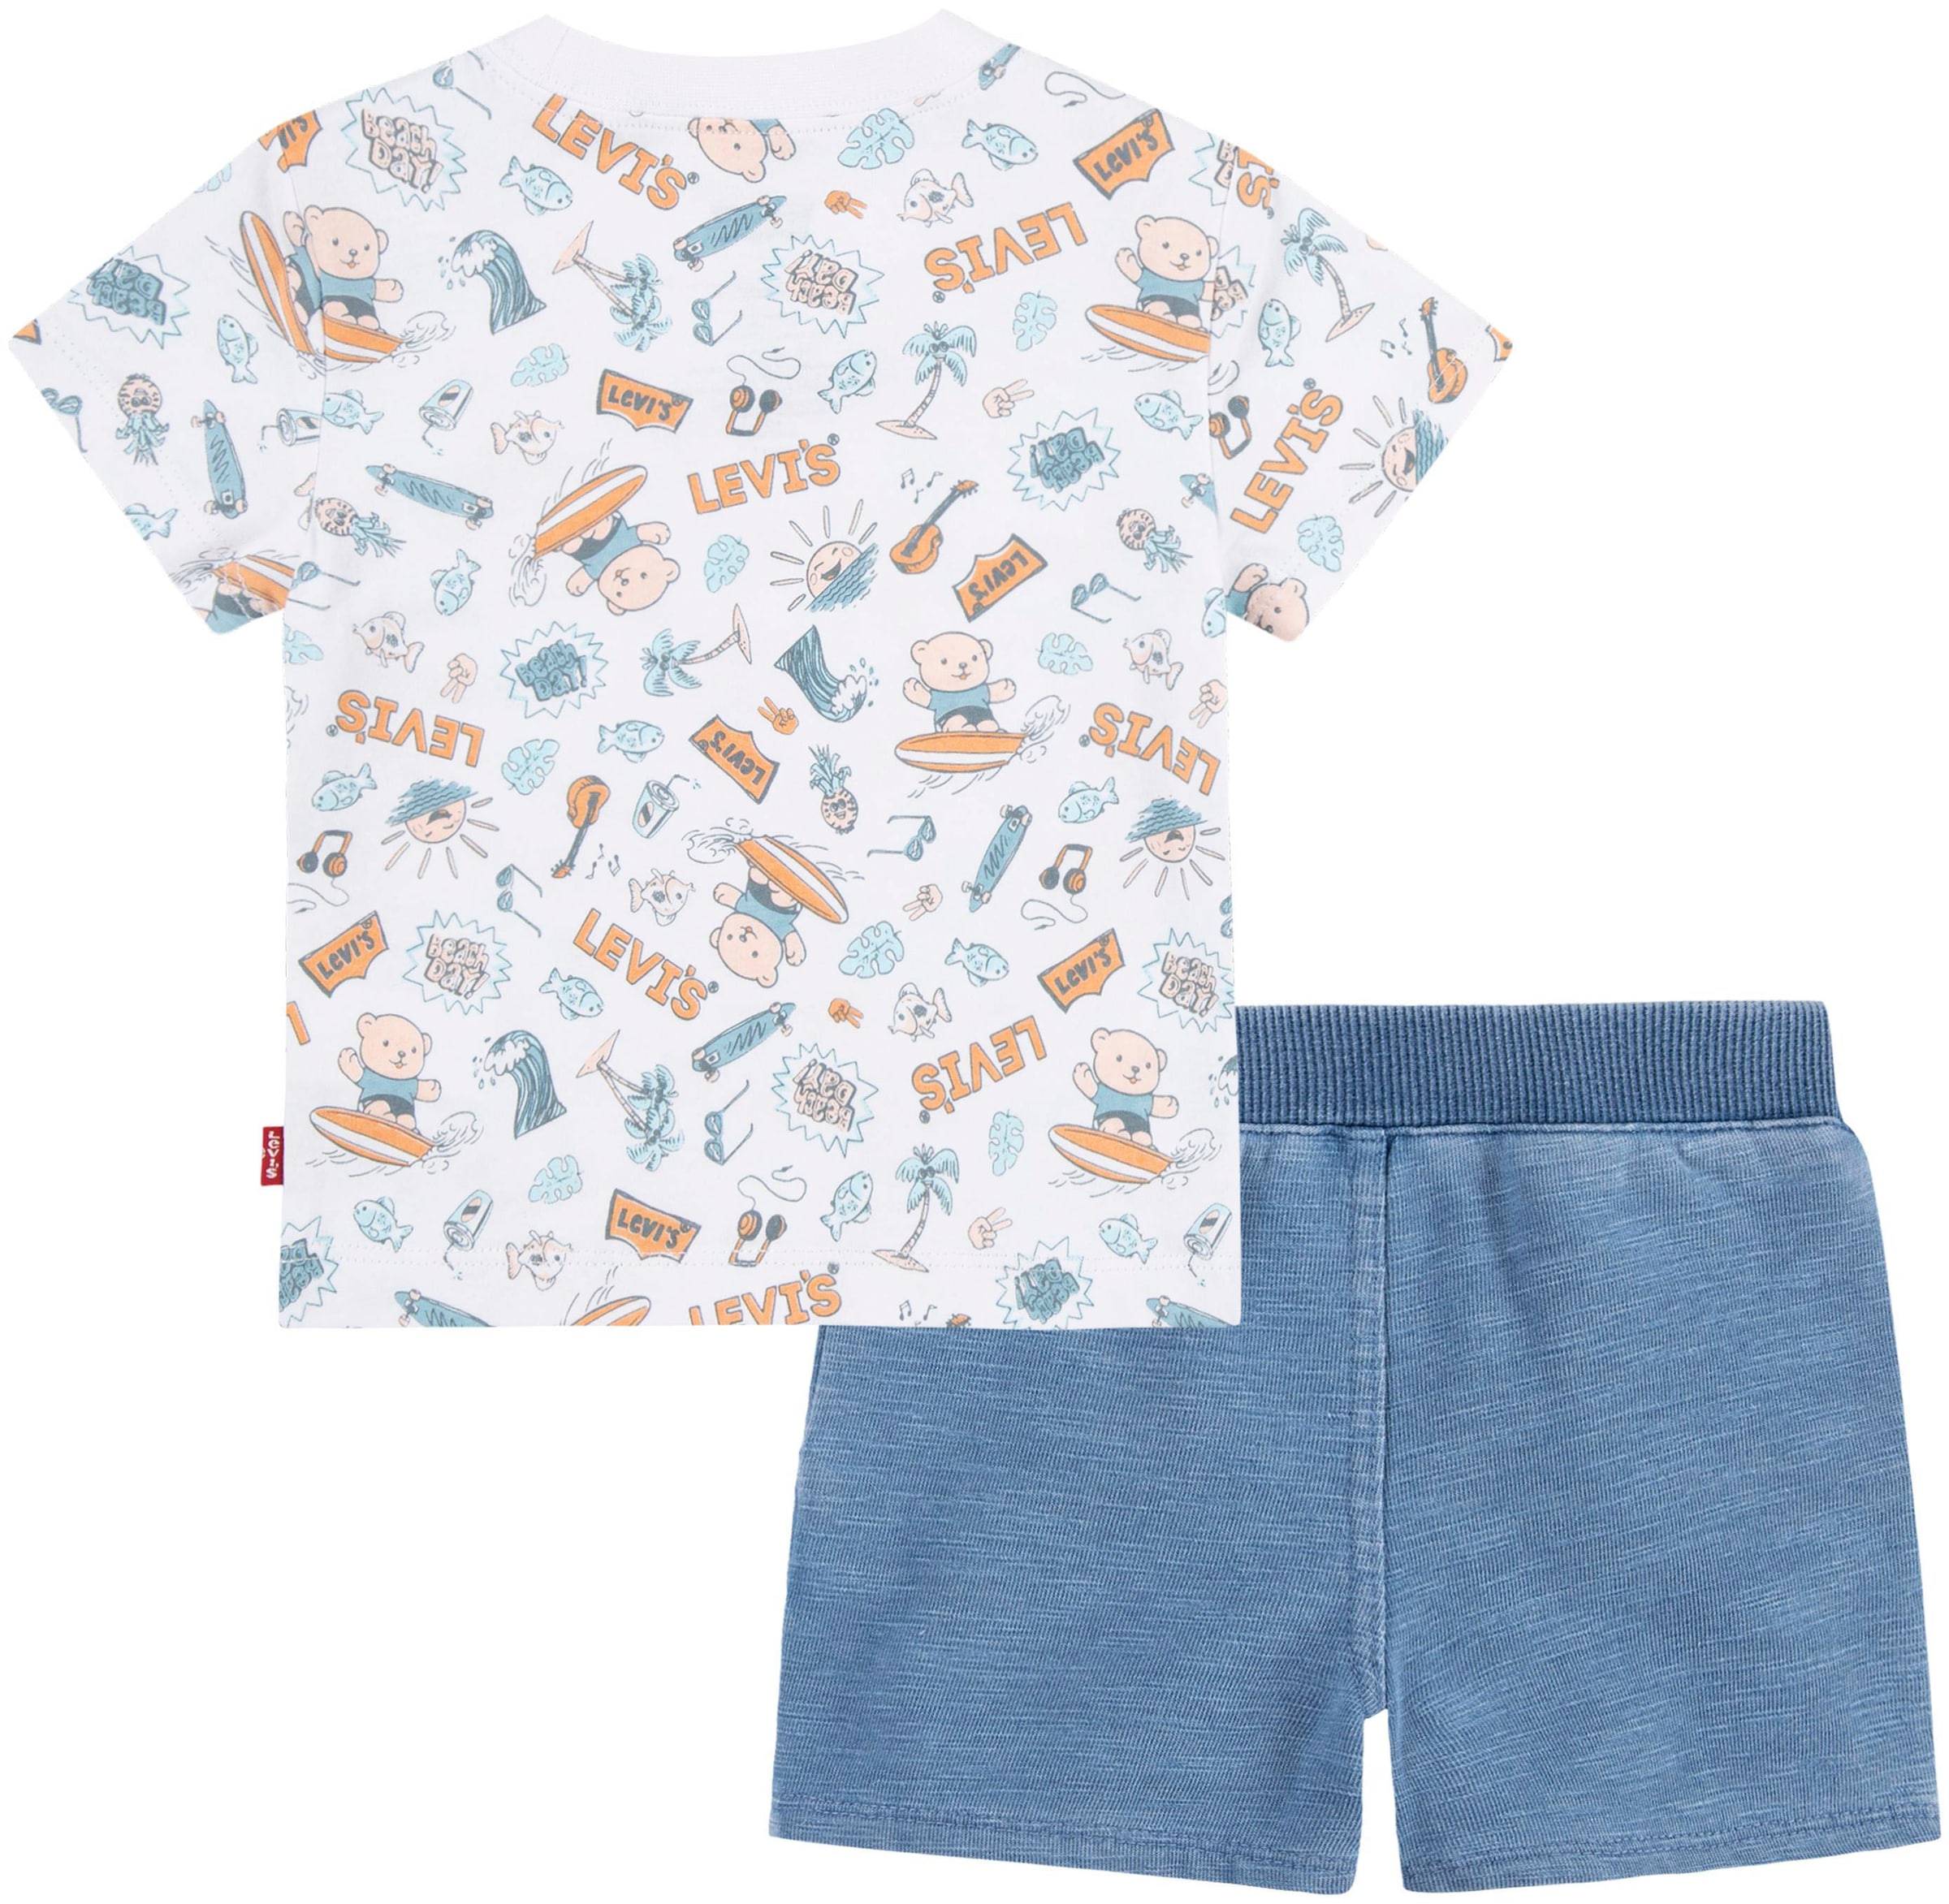 Levi's® Kids Shirt & Shorts »Surfing Doodle«, for Baby BOYS